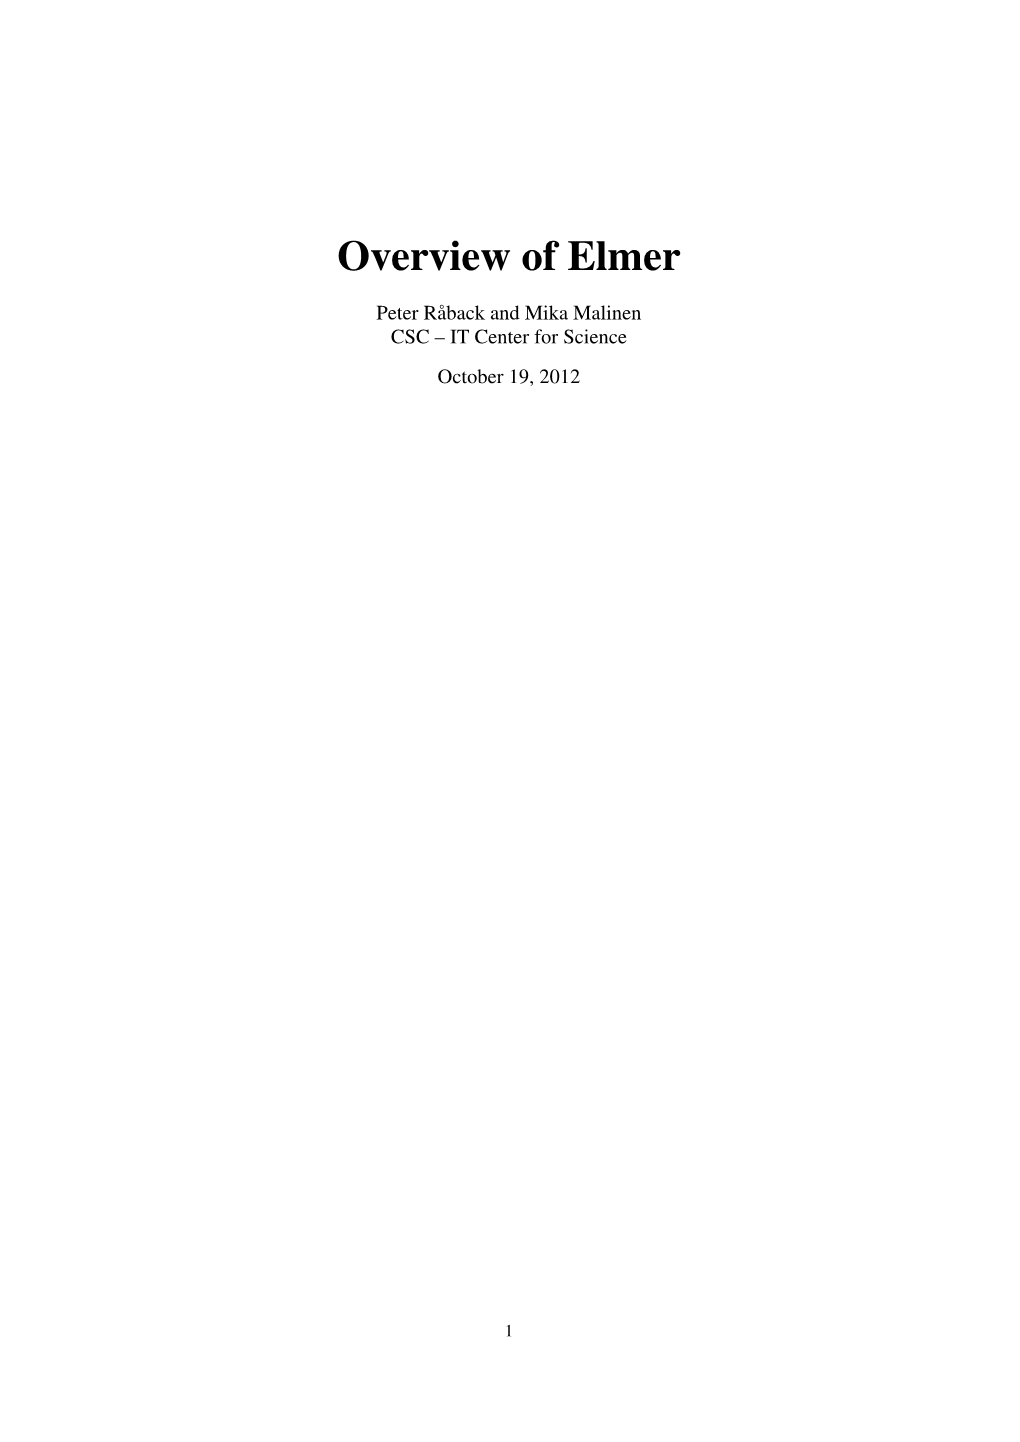 Overview of Elmer